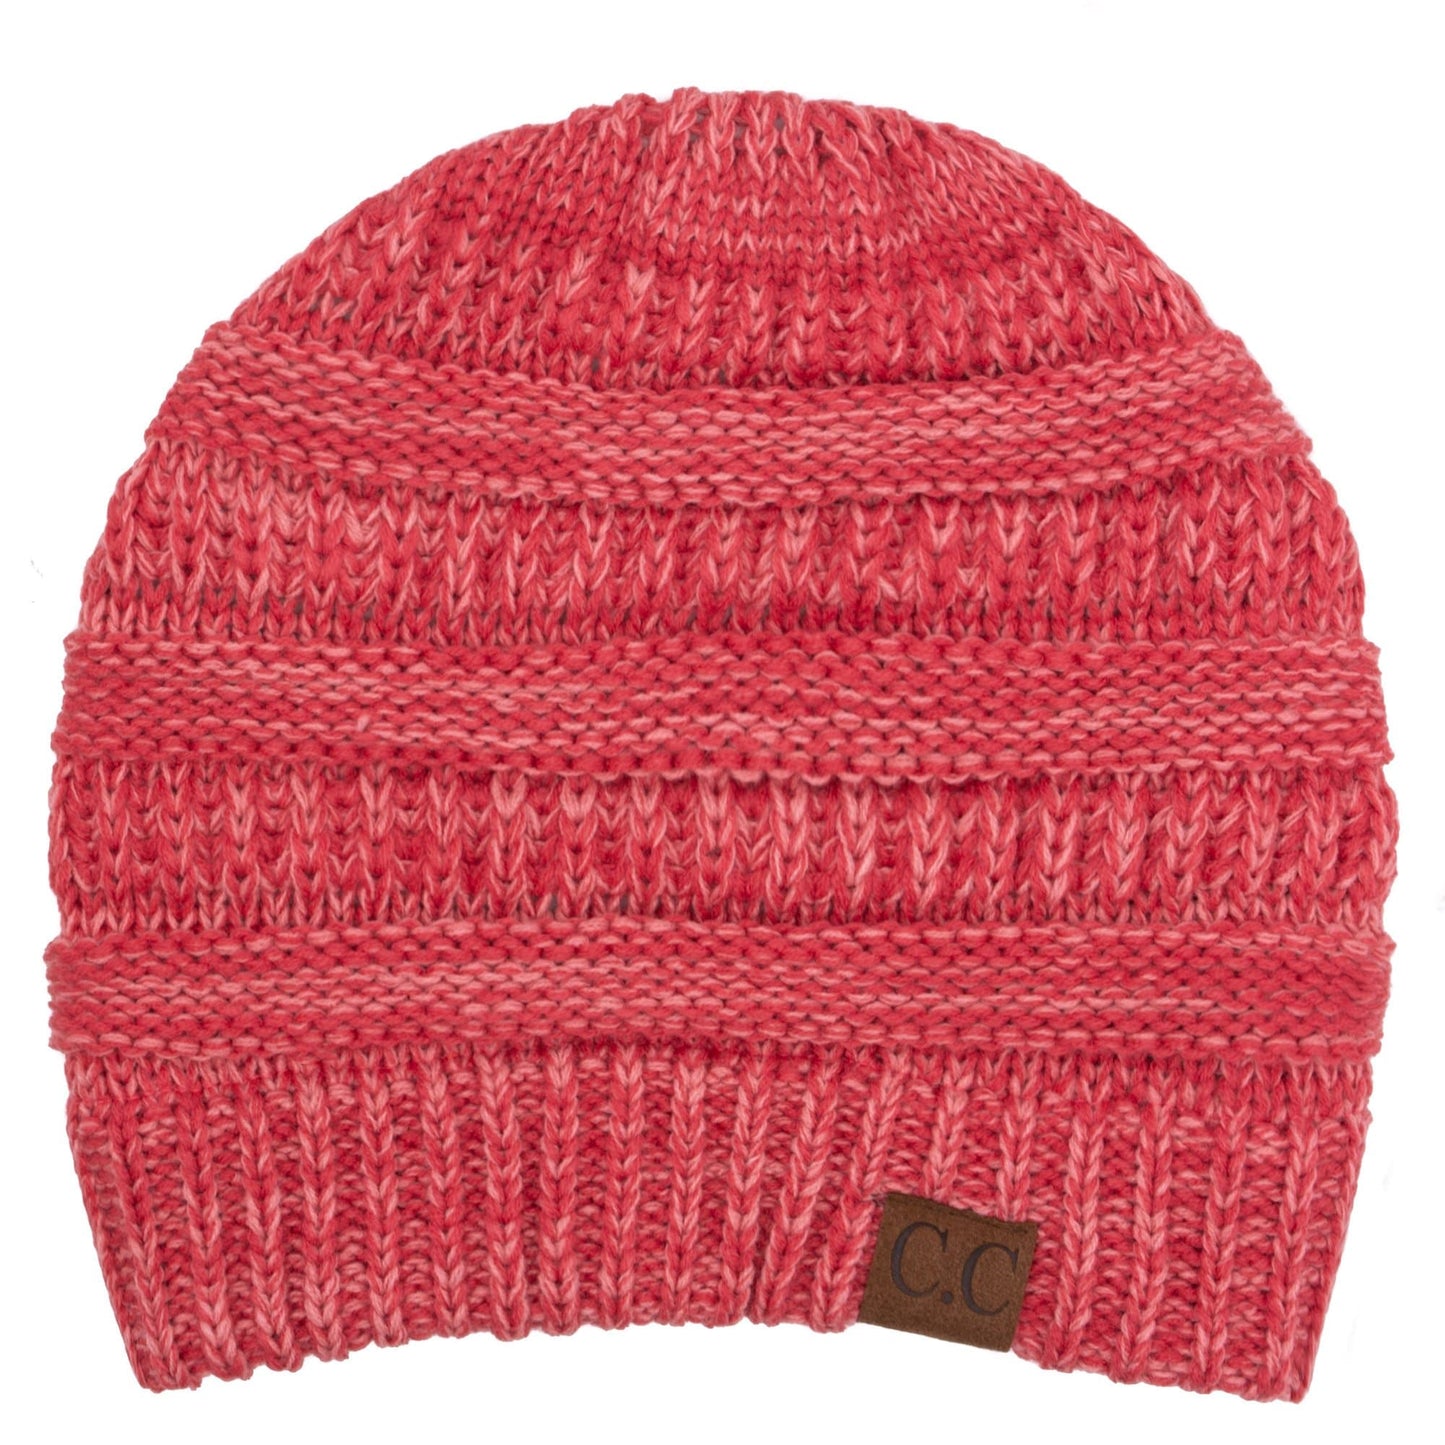 C.C Apparel Two Tone Coral C.C Trendy Warm Chunky Soft Stretch Two-Toned Cable Knit Beanie Skully